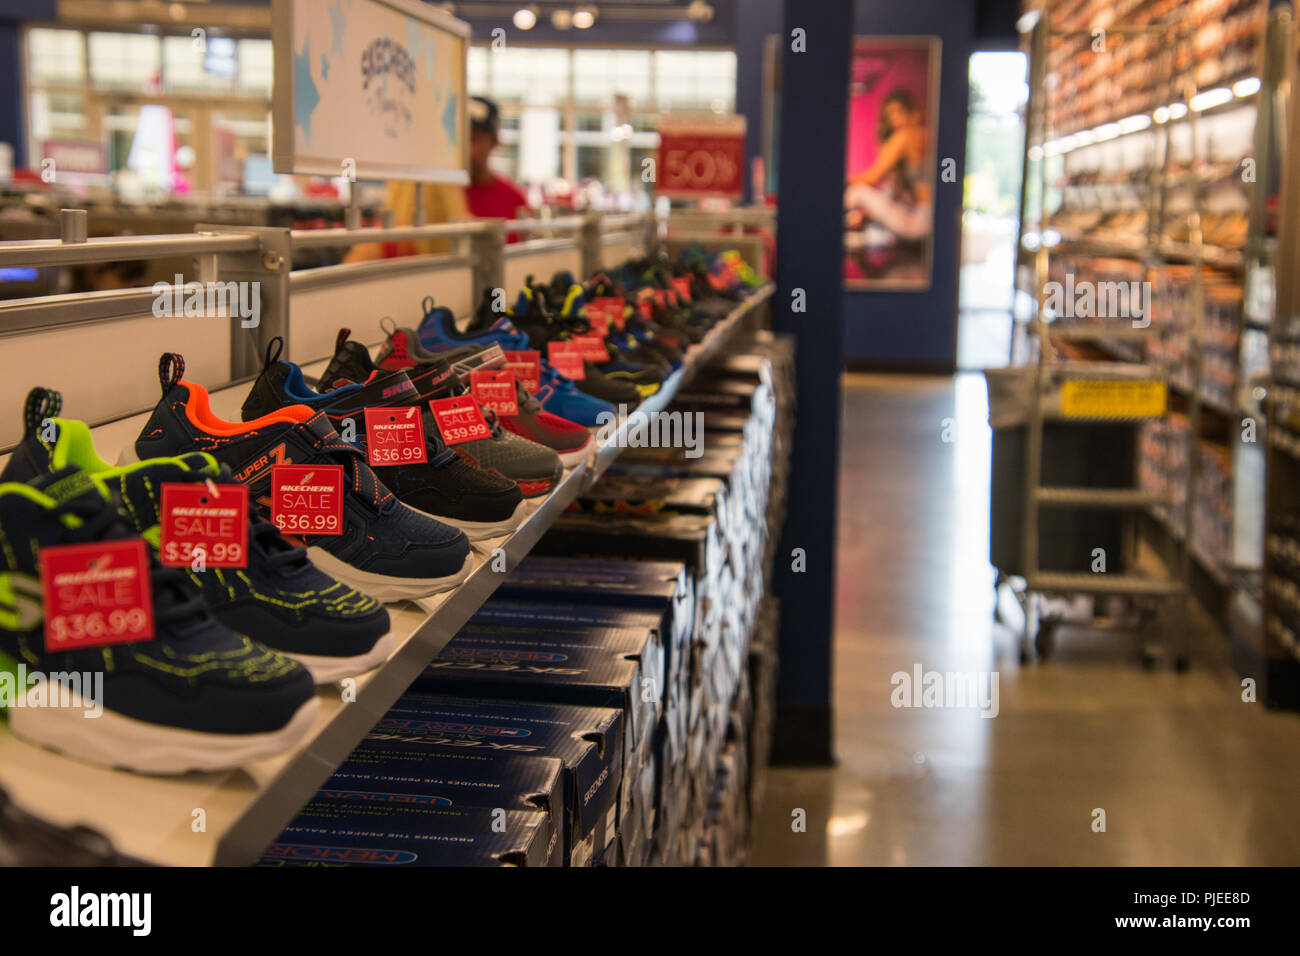 Gloucester, New Jersey - August 18, 2018: Rows of shoes for sale as seen in  a Sketcher's store on this date Stock Photo - Alamy